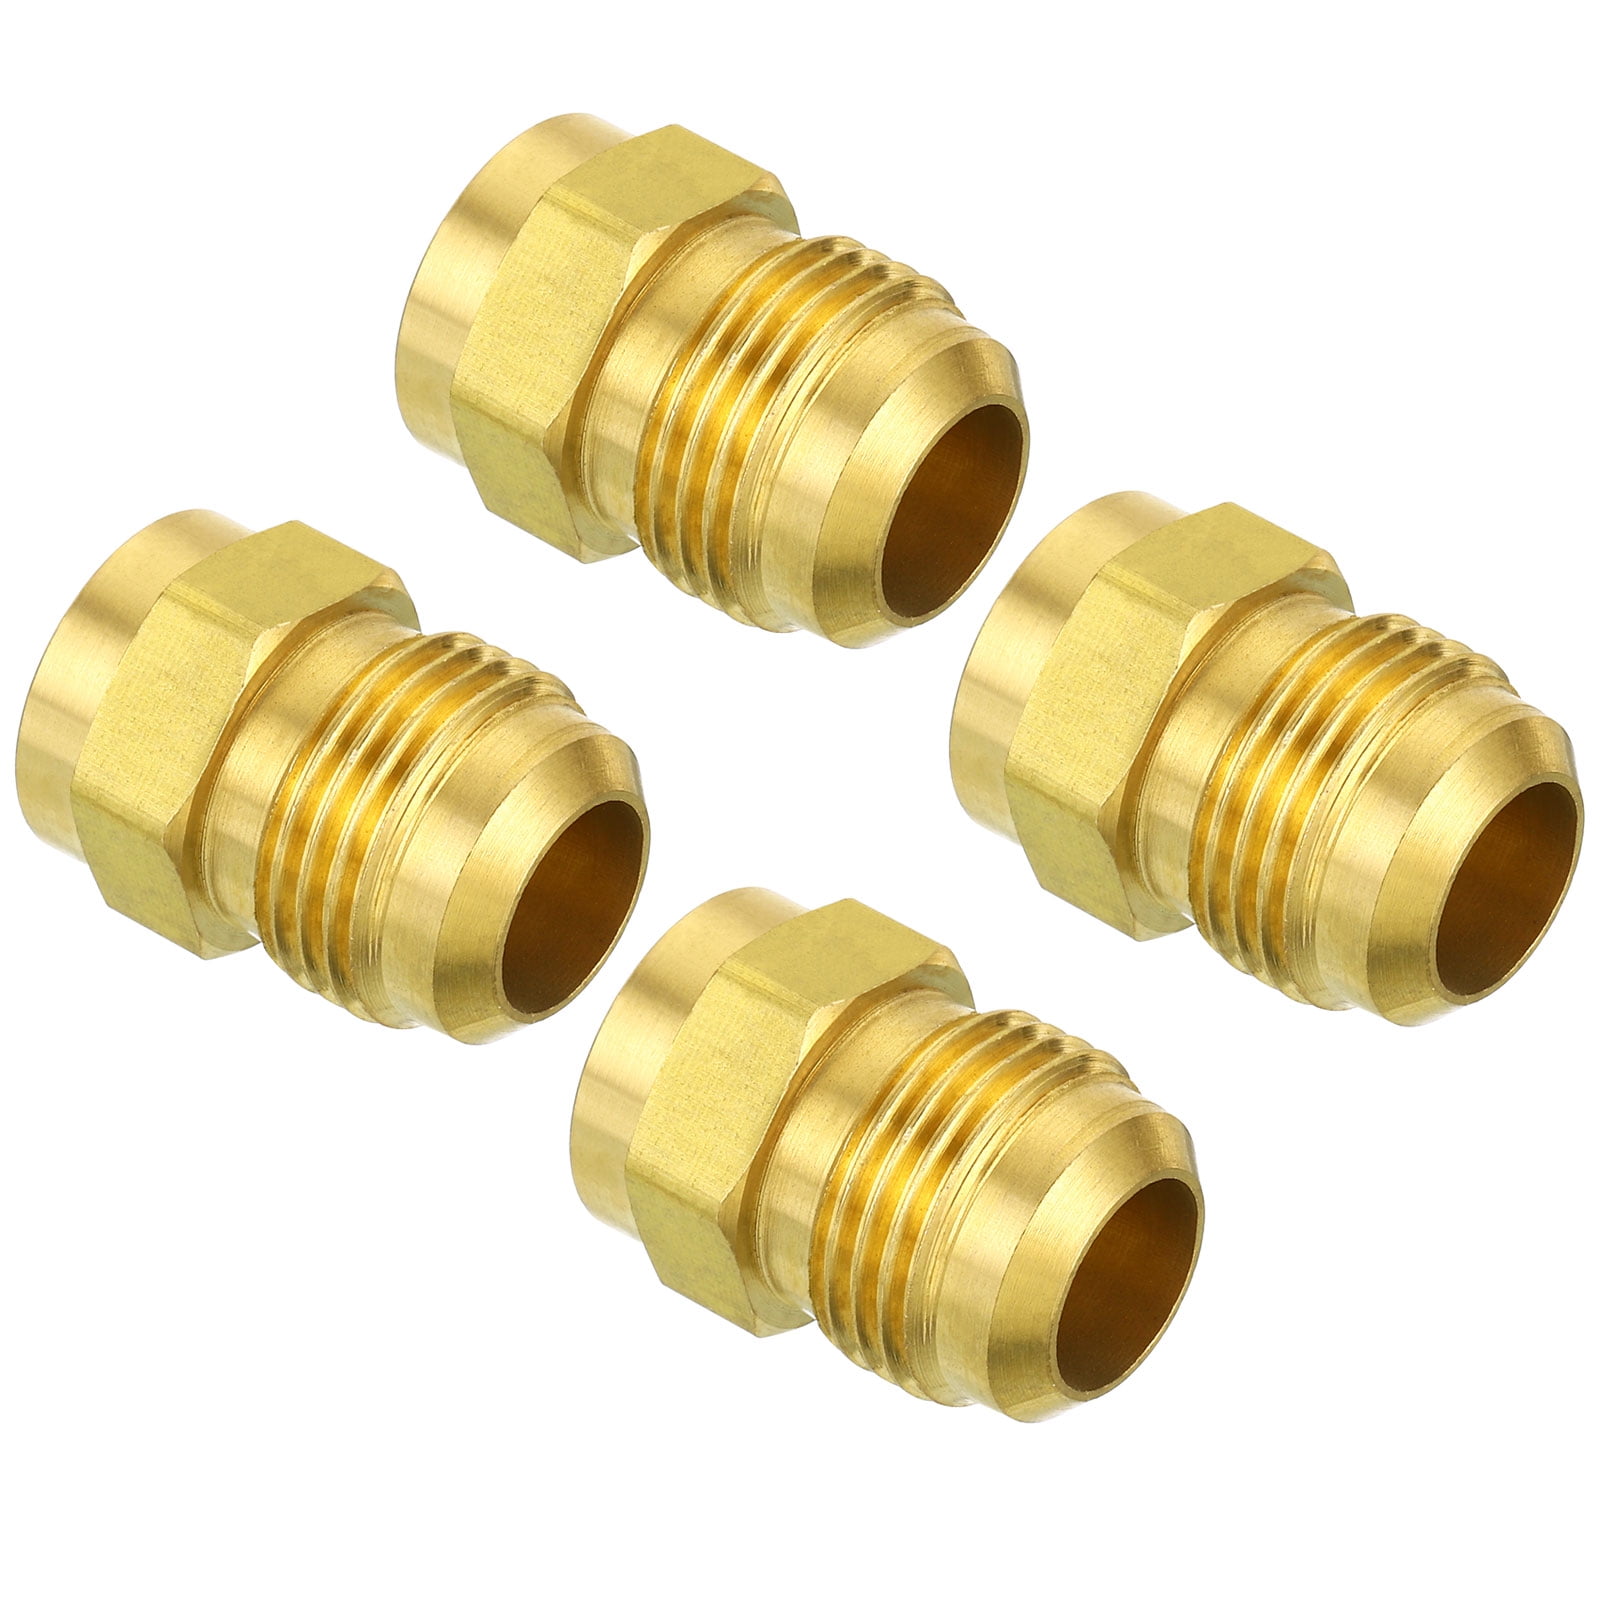 Uxcell 1/4 SAE Male Thread Brass Flare Tube Fitting Pipe Adapter Connector  for Plumbing HVAC Air Conditioner 2 Pack 